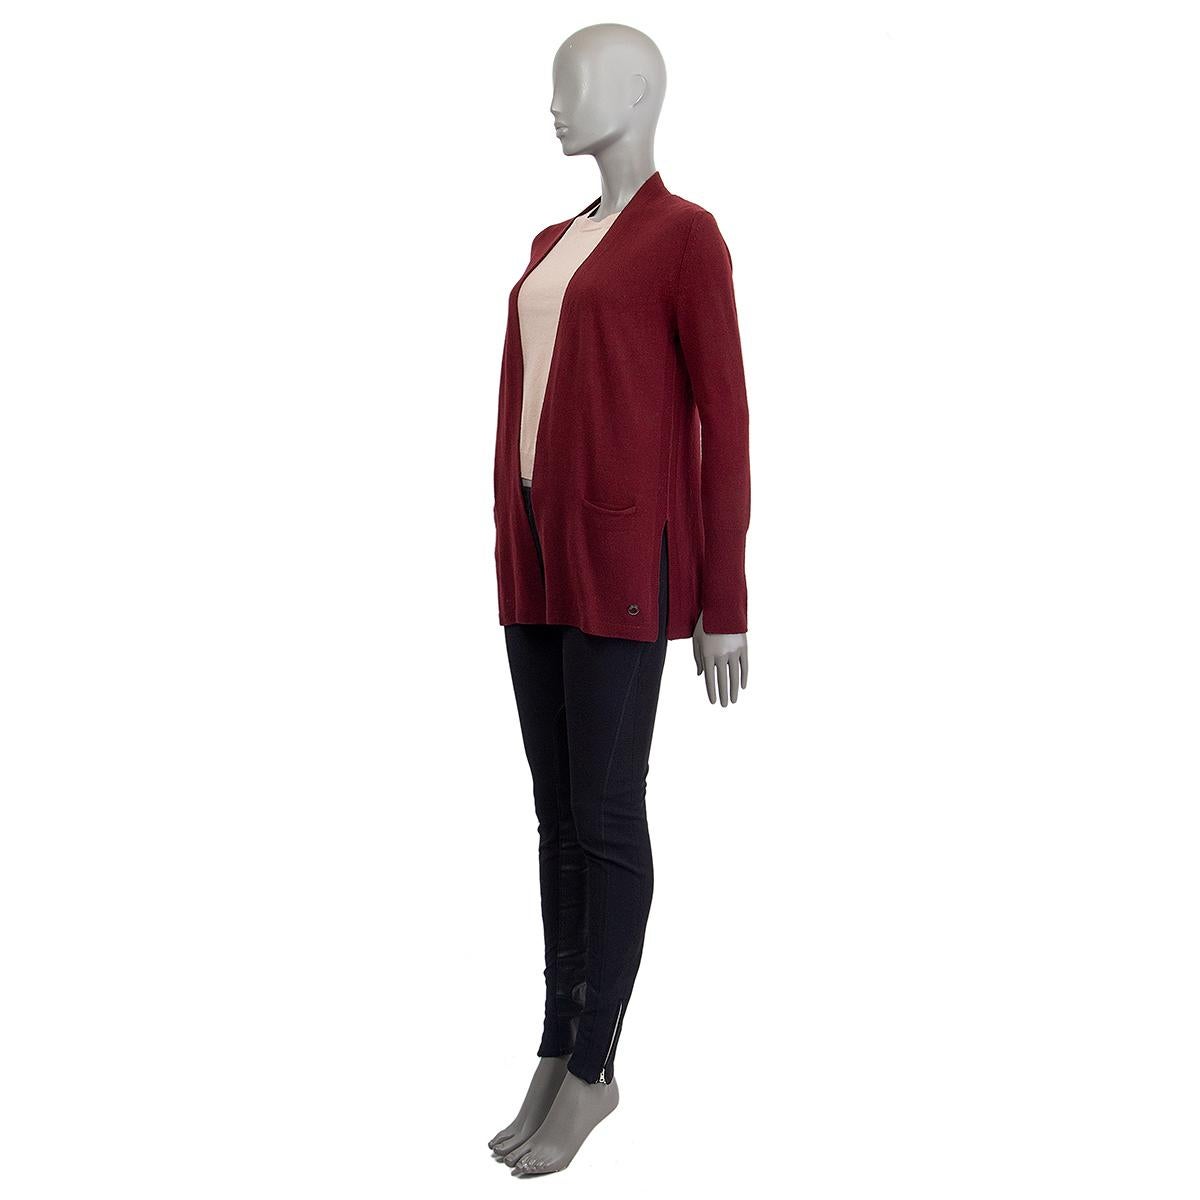 Loro Piana open cardigan in burgundy vicuna (100%) with two small open pockets. Has been worn and is in excellent condition.

Tag Size 40
Size S
Shoulder Width 40cm (15.6in)
Bust 96cm (37.4in) to 106cm (41.3in)
Waist 94cm (36.7in) to 104cm